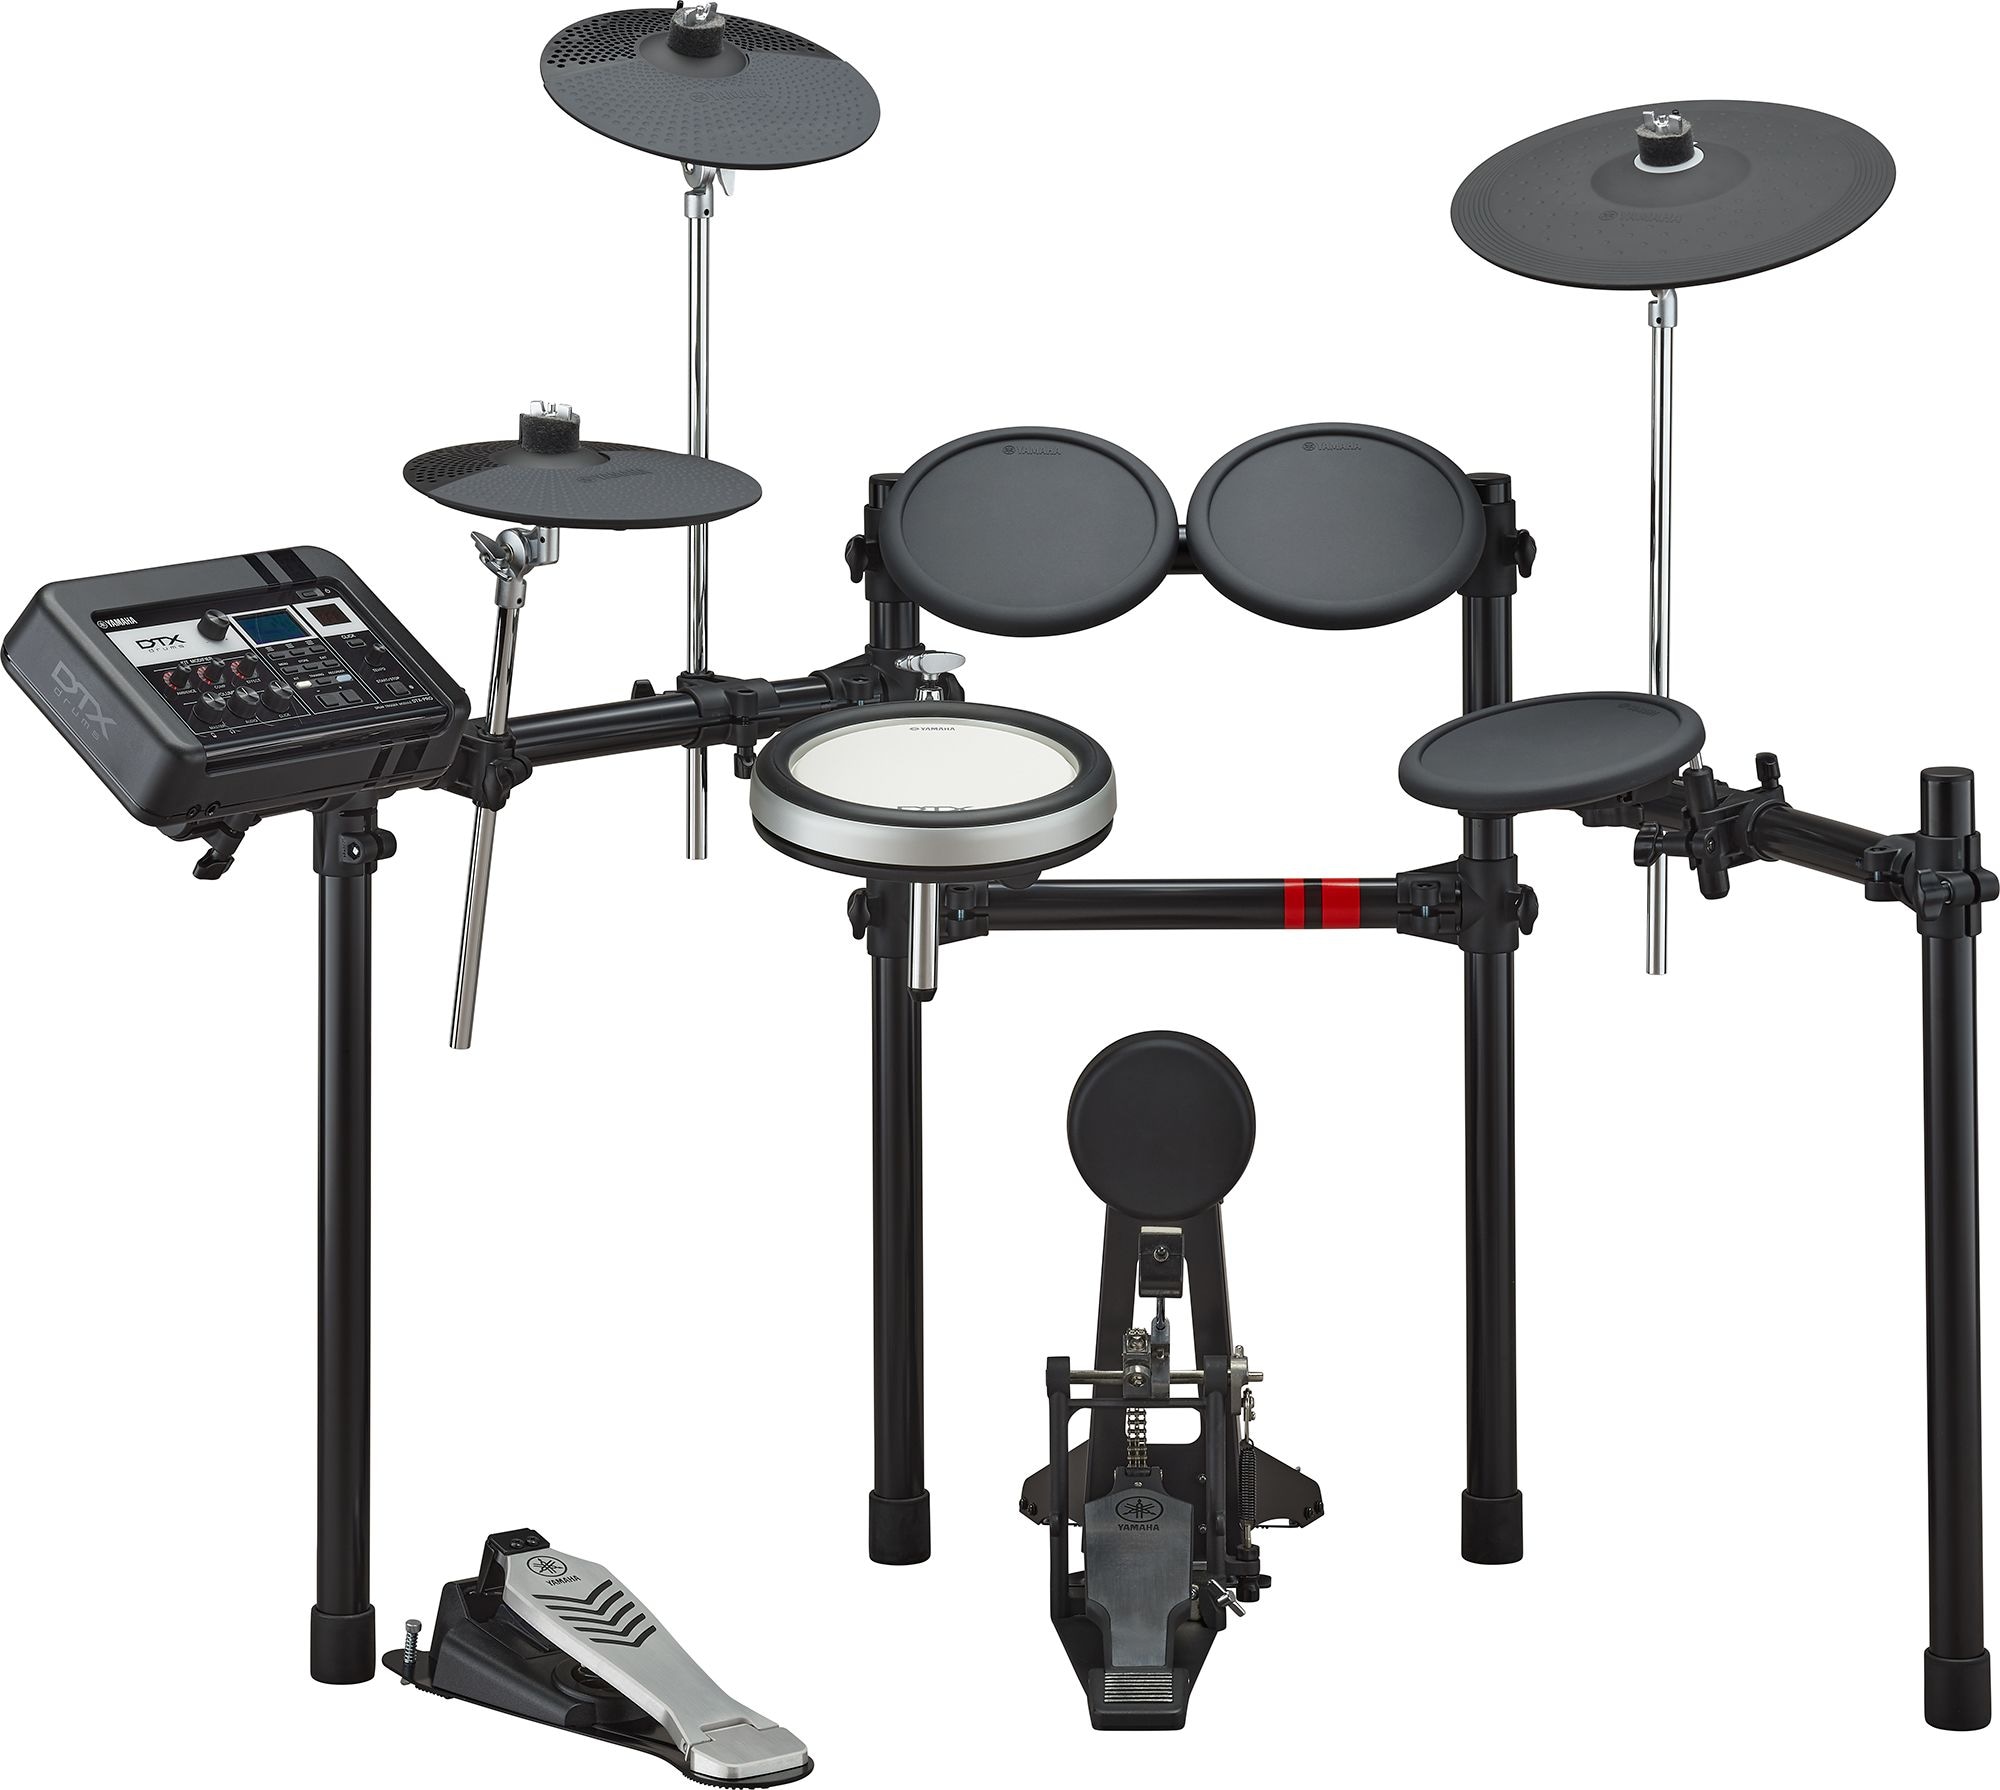 Series - - - / - Products Kits East / Latin - / / Drum Drums Electronic America Products - Asia Drums Oceania CIS Instruments Middle Yamaha DTX6 Musical - Africa / - Electronic